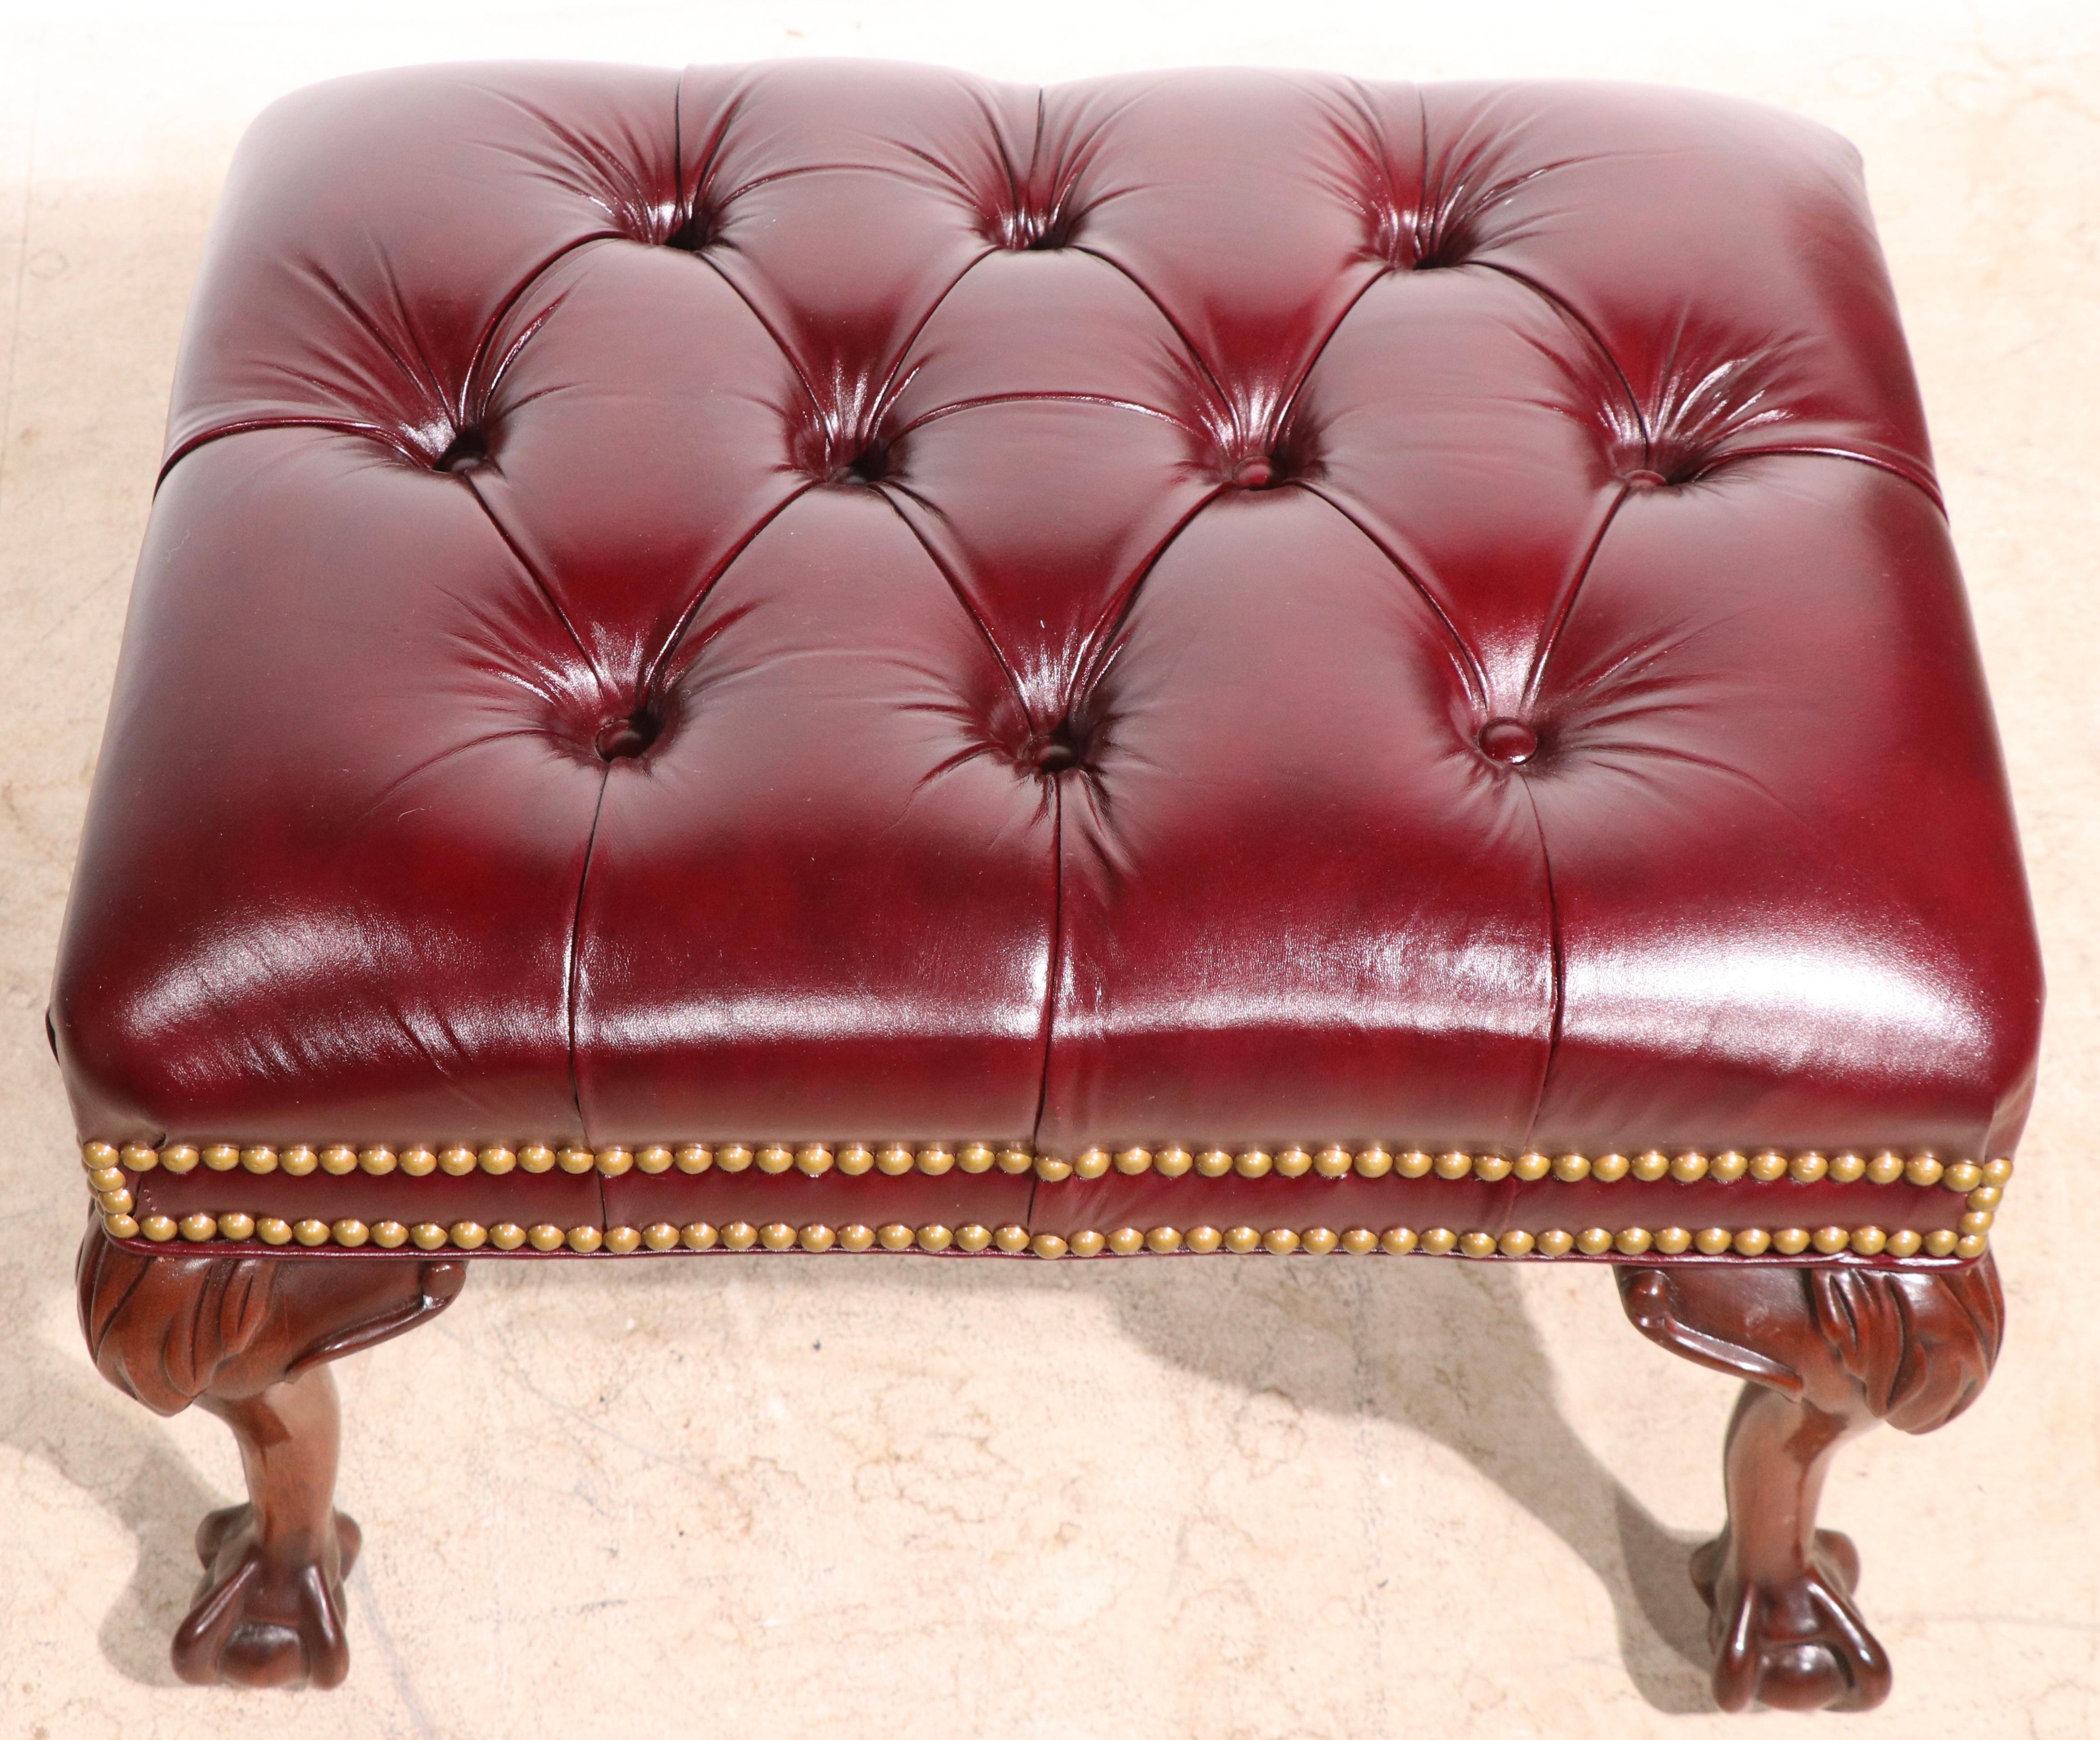 20th Century Tufted Leather Wing Chair and Ottoman by Leathercraft Inc.